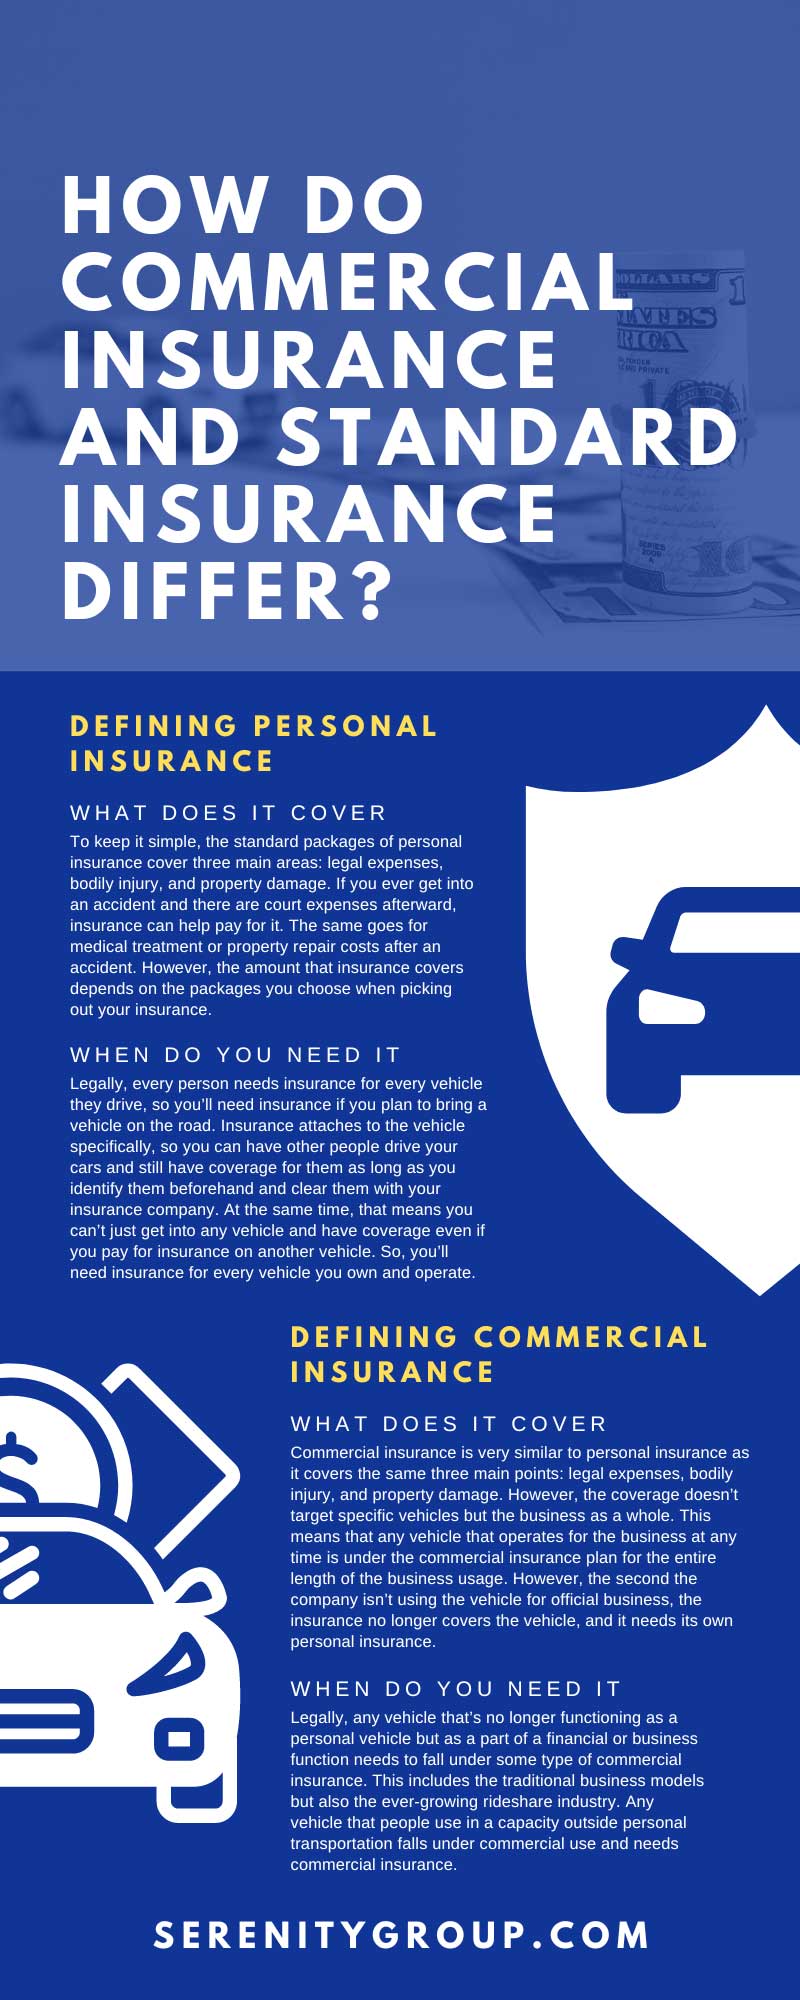 How Do Commercial Insurance and Standard Insurance Differ?